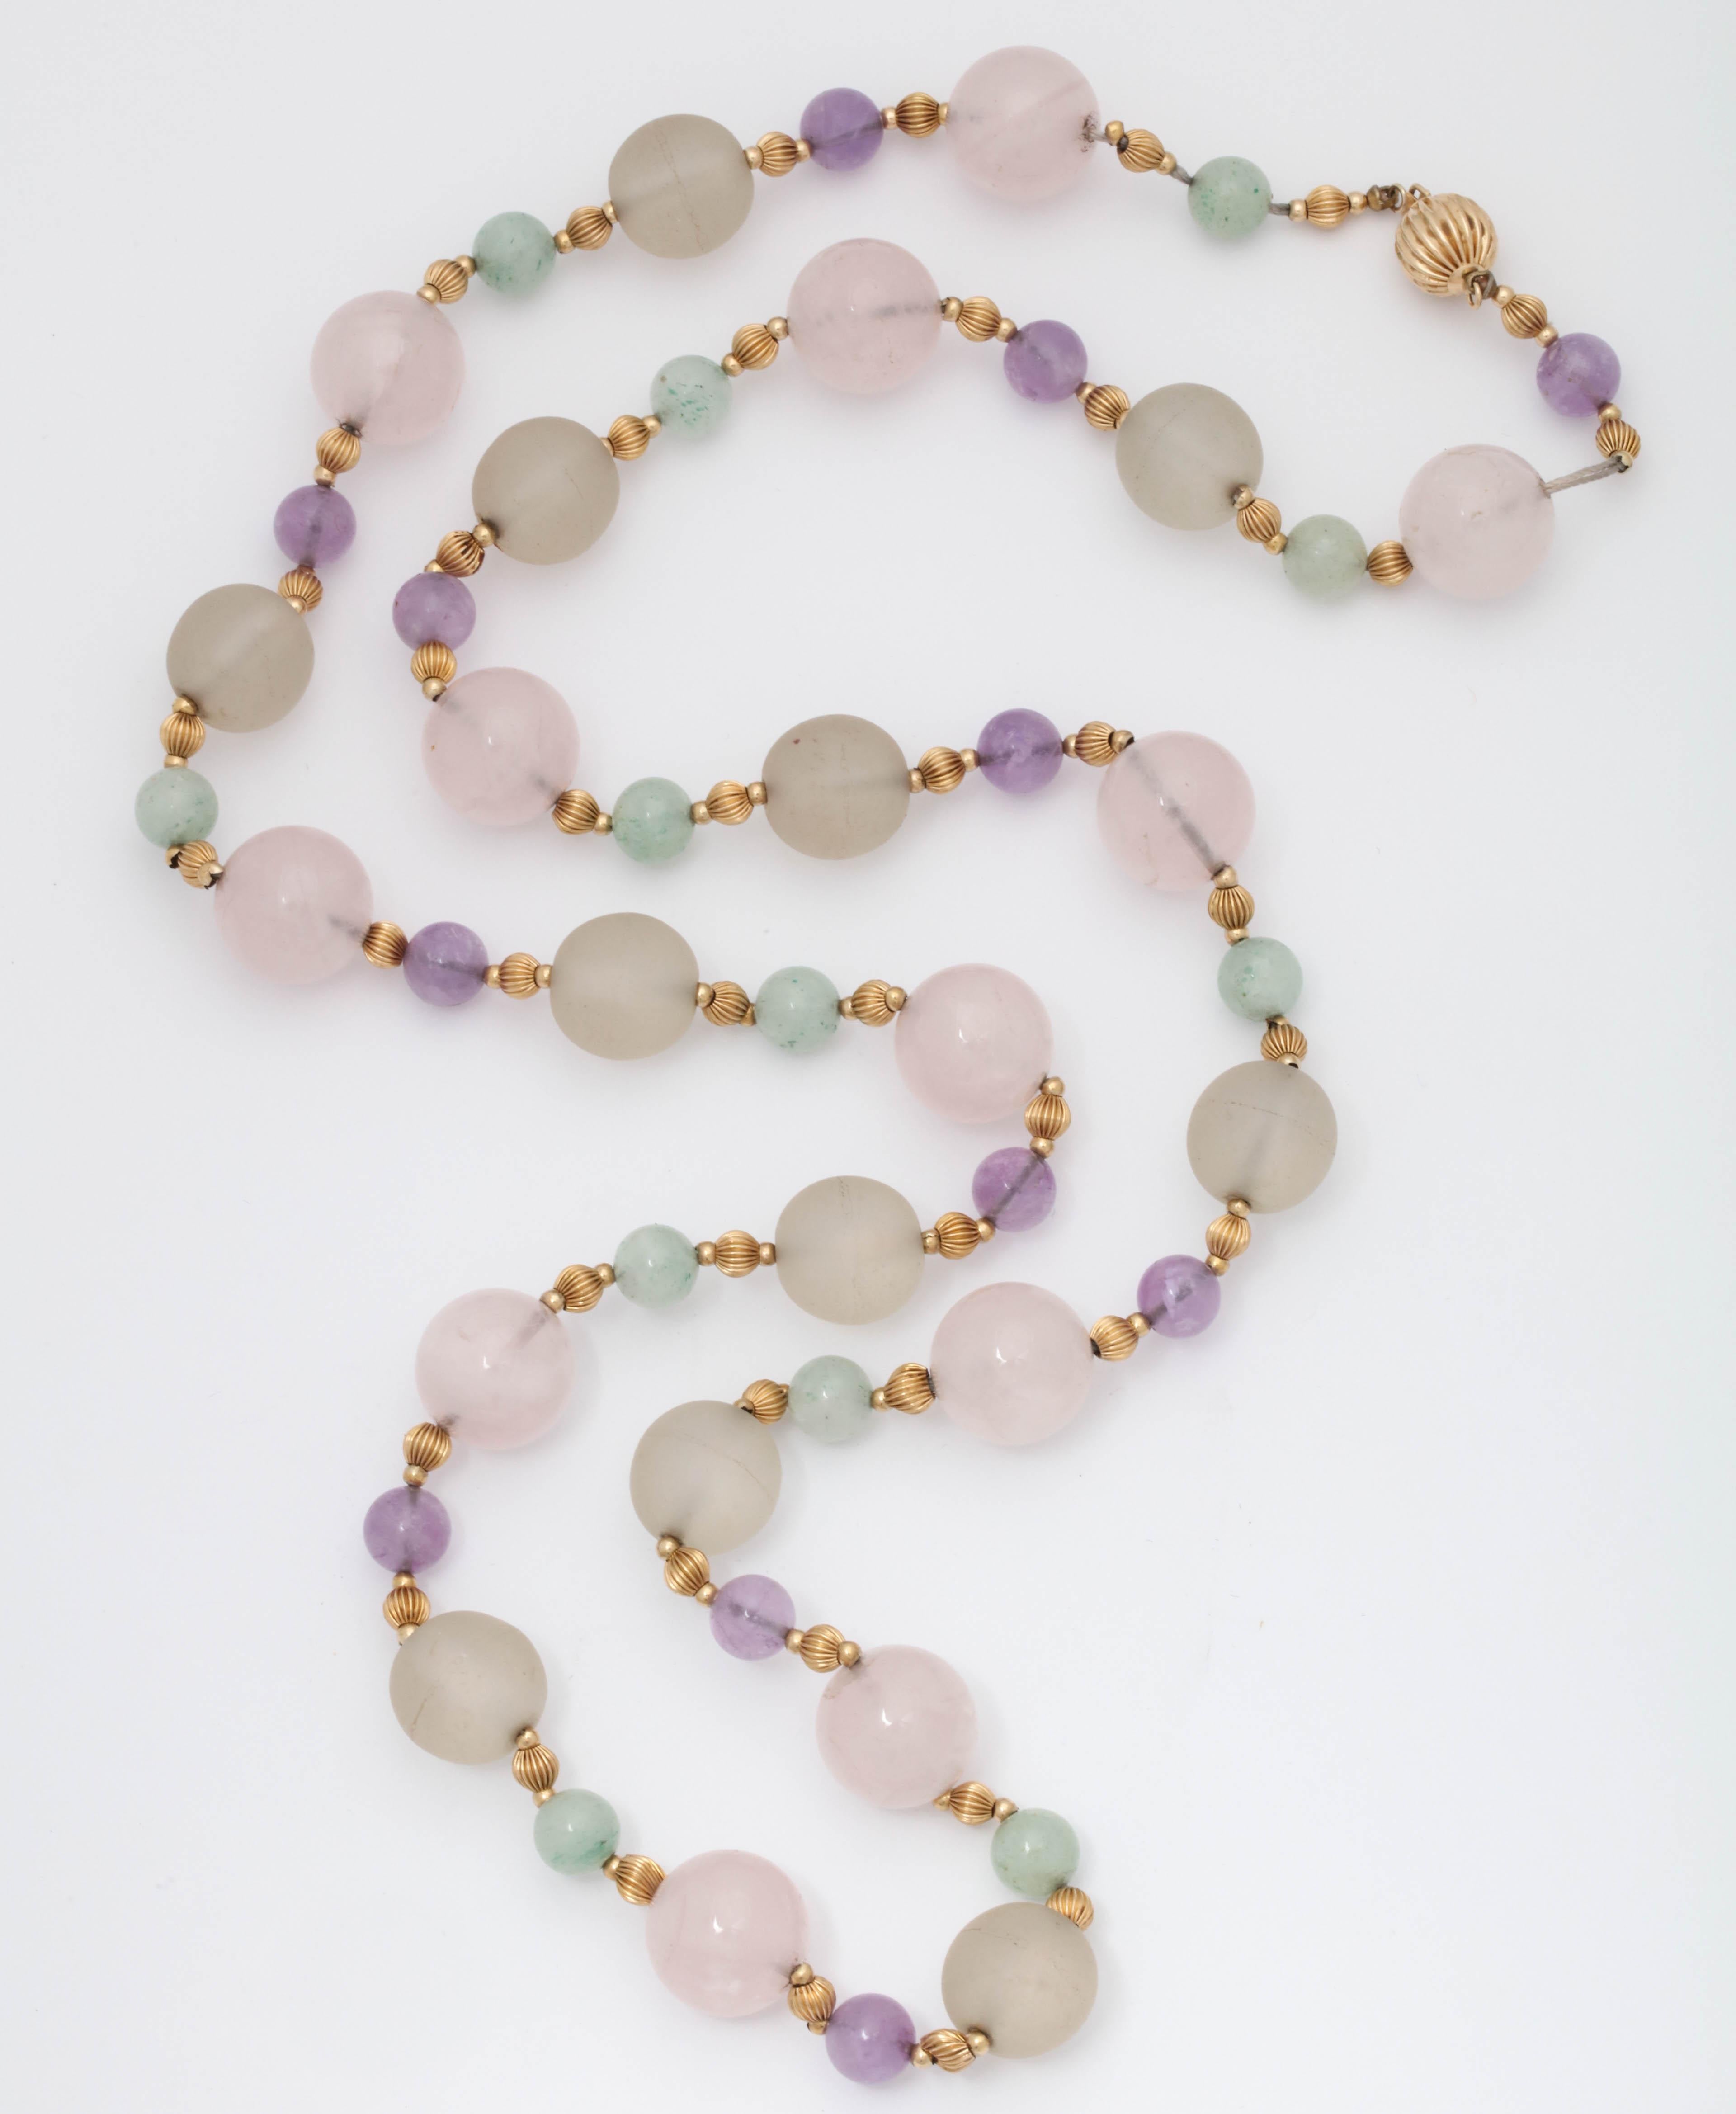 One Ladies 14kt Yellow Gold Necklace Created With Numerous Rock Crystal Beads Measuring Approximately 10MM Each. Further Designed With Alternating Amethyst Beads Measuring 6MM Each,Also Created With Numerous Jade Beads Measuring Approximately 6MM